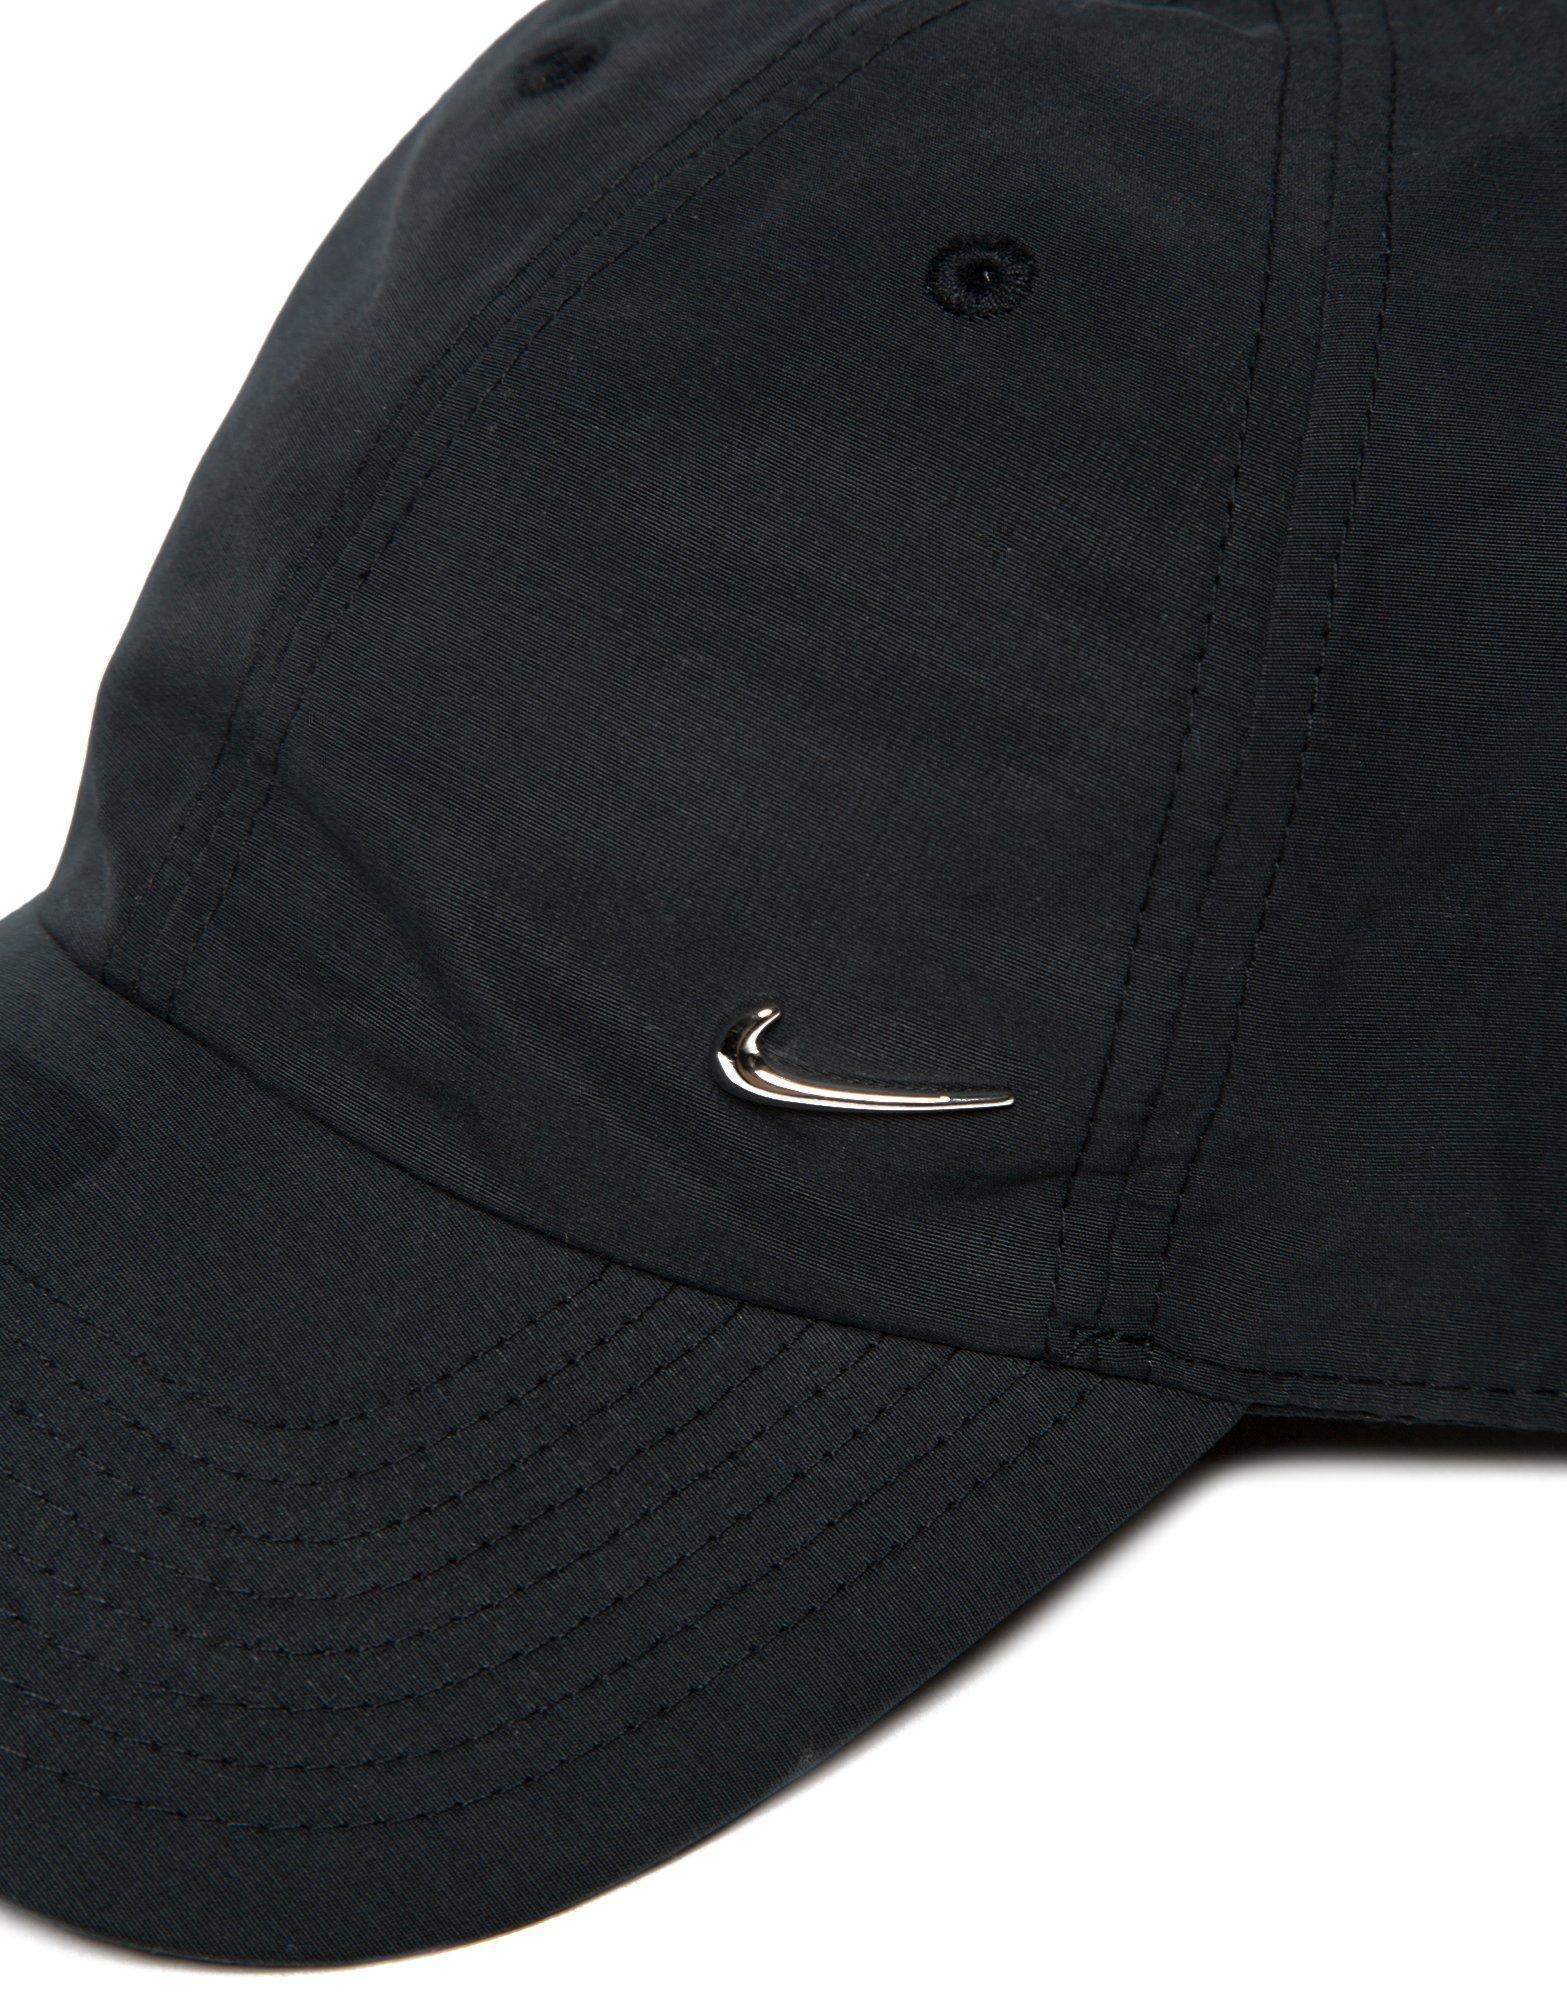 Download Nike Synthetic Side Swoosh Cap in Black/Silver (Black) for ...